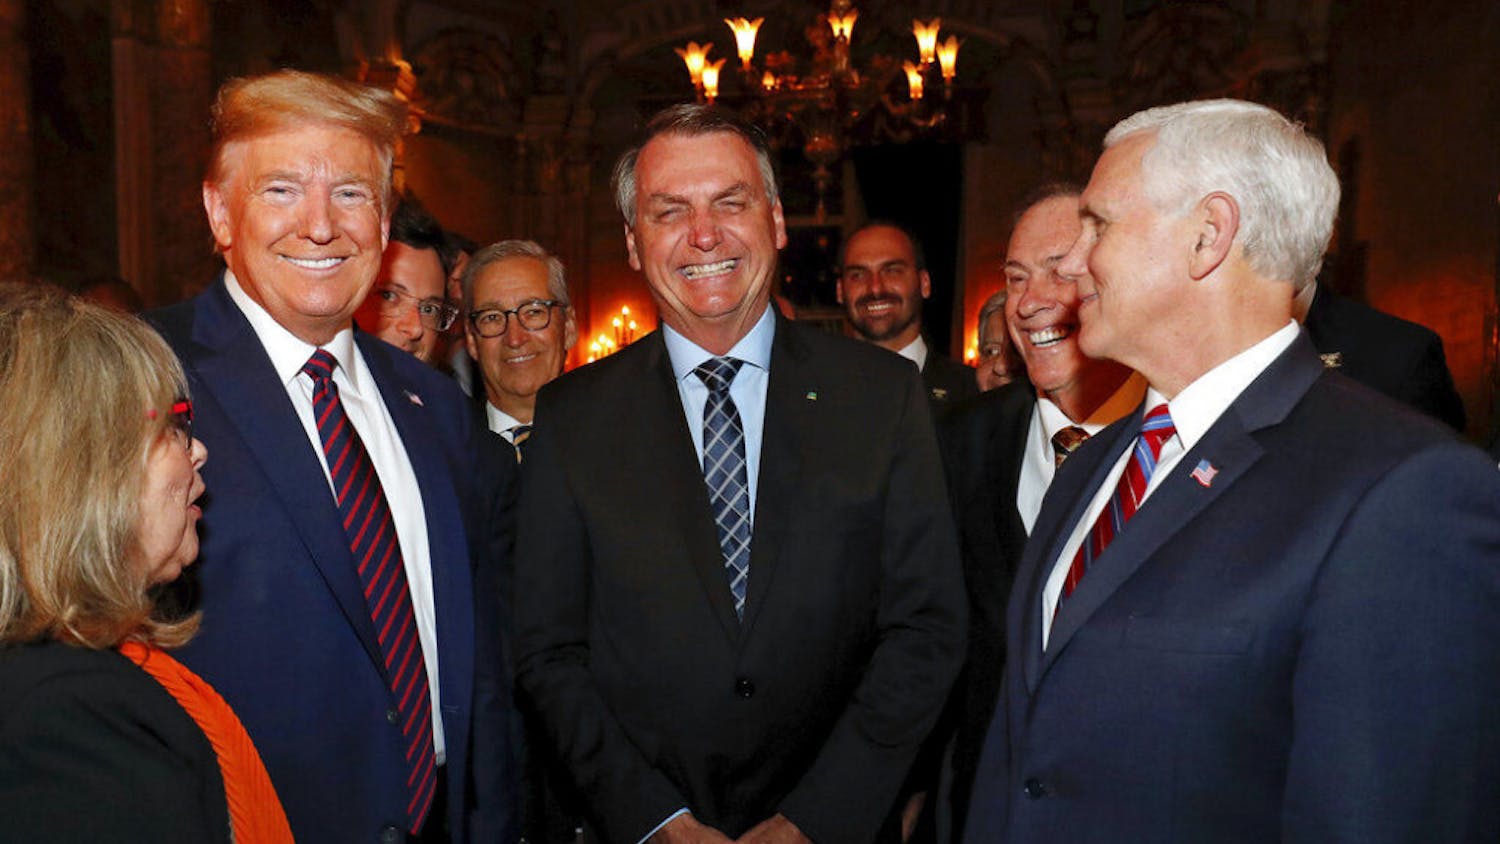 In this March 7, 2020 photo provided by Brazil's presidential press office, Brazil's President Jair Bolsonaro, center, stands with President Donald Trump, second from left, Vice President Mike Pence, right, and Brazil's Communications Director Fabio Wajngarten, behind Trump partially covered, during a dinner in Florida. Wajngarten tested positive for the new coronavirus, just days after the trip, according to Bolsonaro's communications office on Thursday, March 12, 2020. (Alan Santos/Brazil's Presidential Press Office via AP)